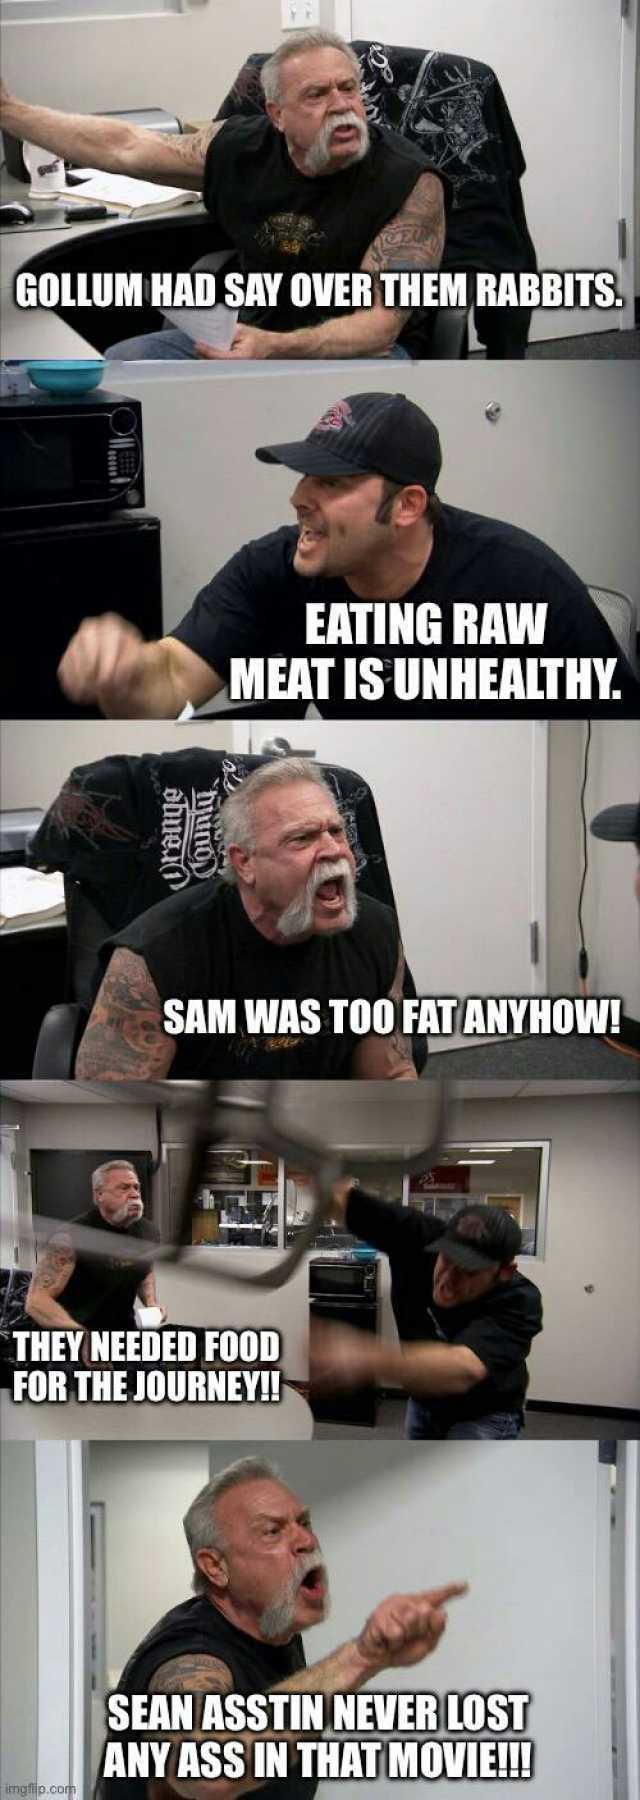 GOLLUM HAD SAY OVER THEM RABBITS EATING RAW MEAT IS UNHEALTHY. SAM WAS TOO FAT ANYHOW THEY NEEDED FOOD FOR THE JOURNEY!! SEAN ASSTIN NEVER LOST ANY ASS IN THAT MOVIEI! ngp.CO